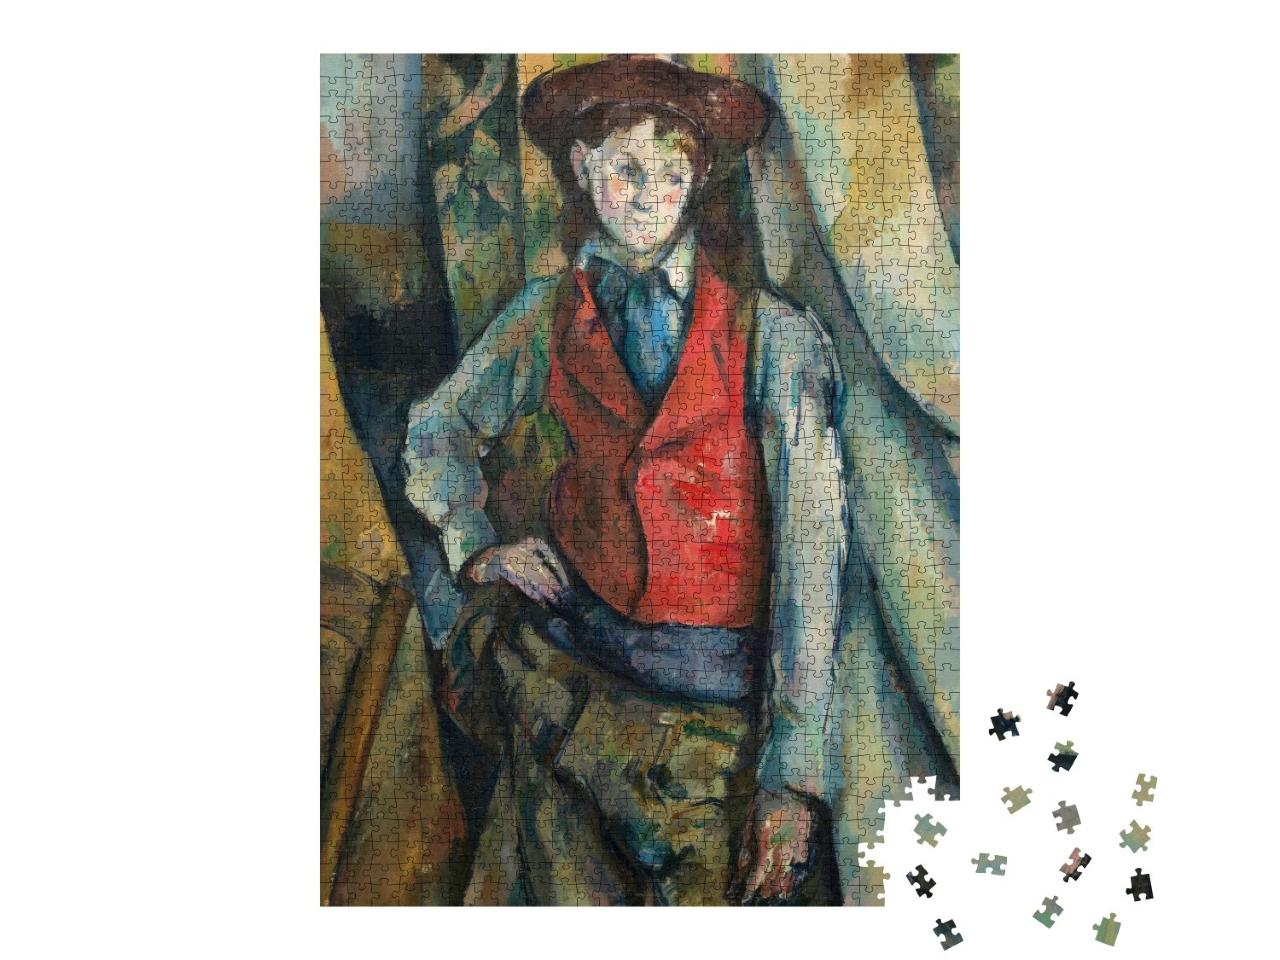 Puzzle 1000 Teile „Paul Cézanne - Junge in roter Weste“